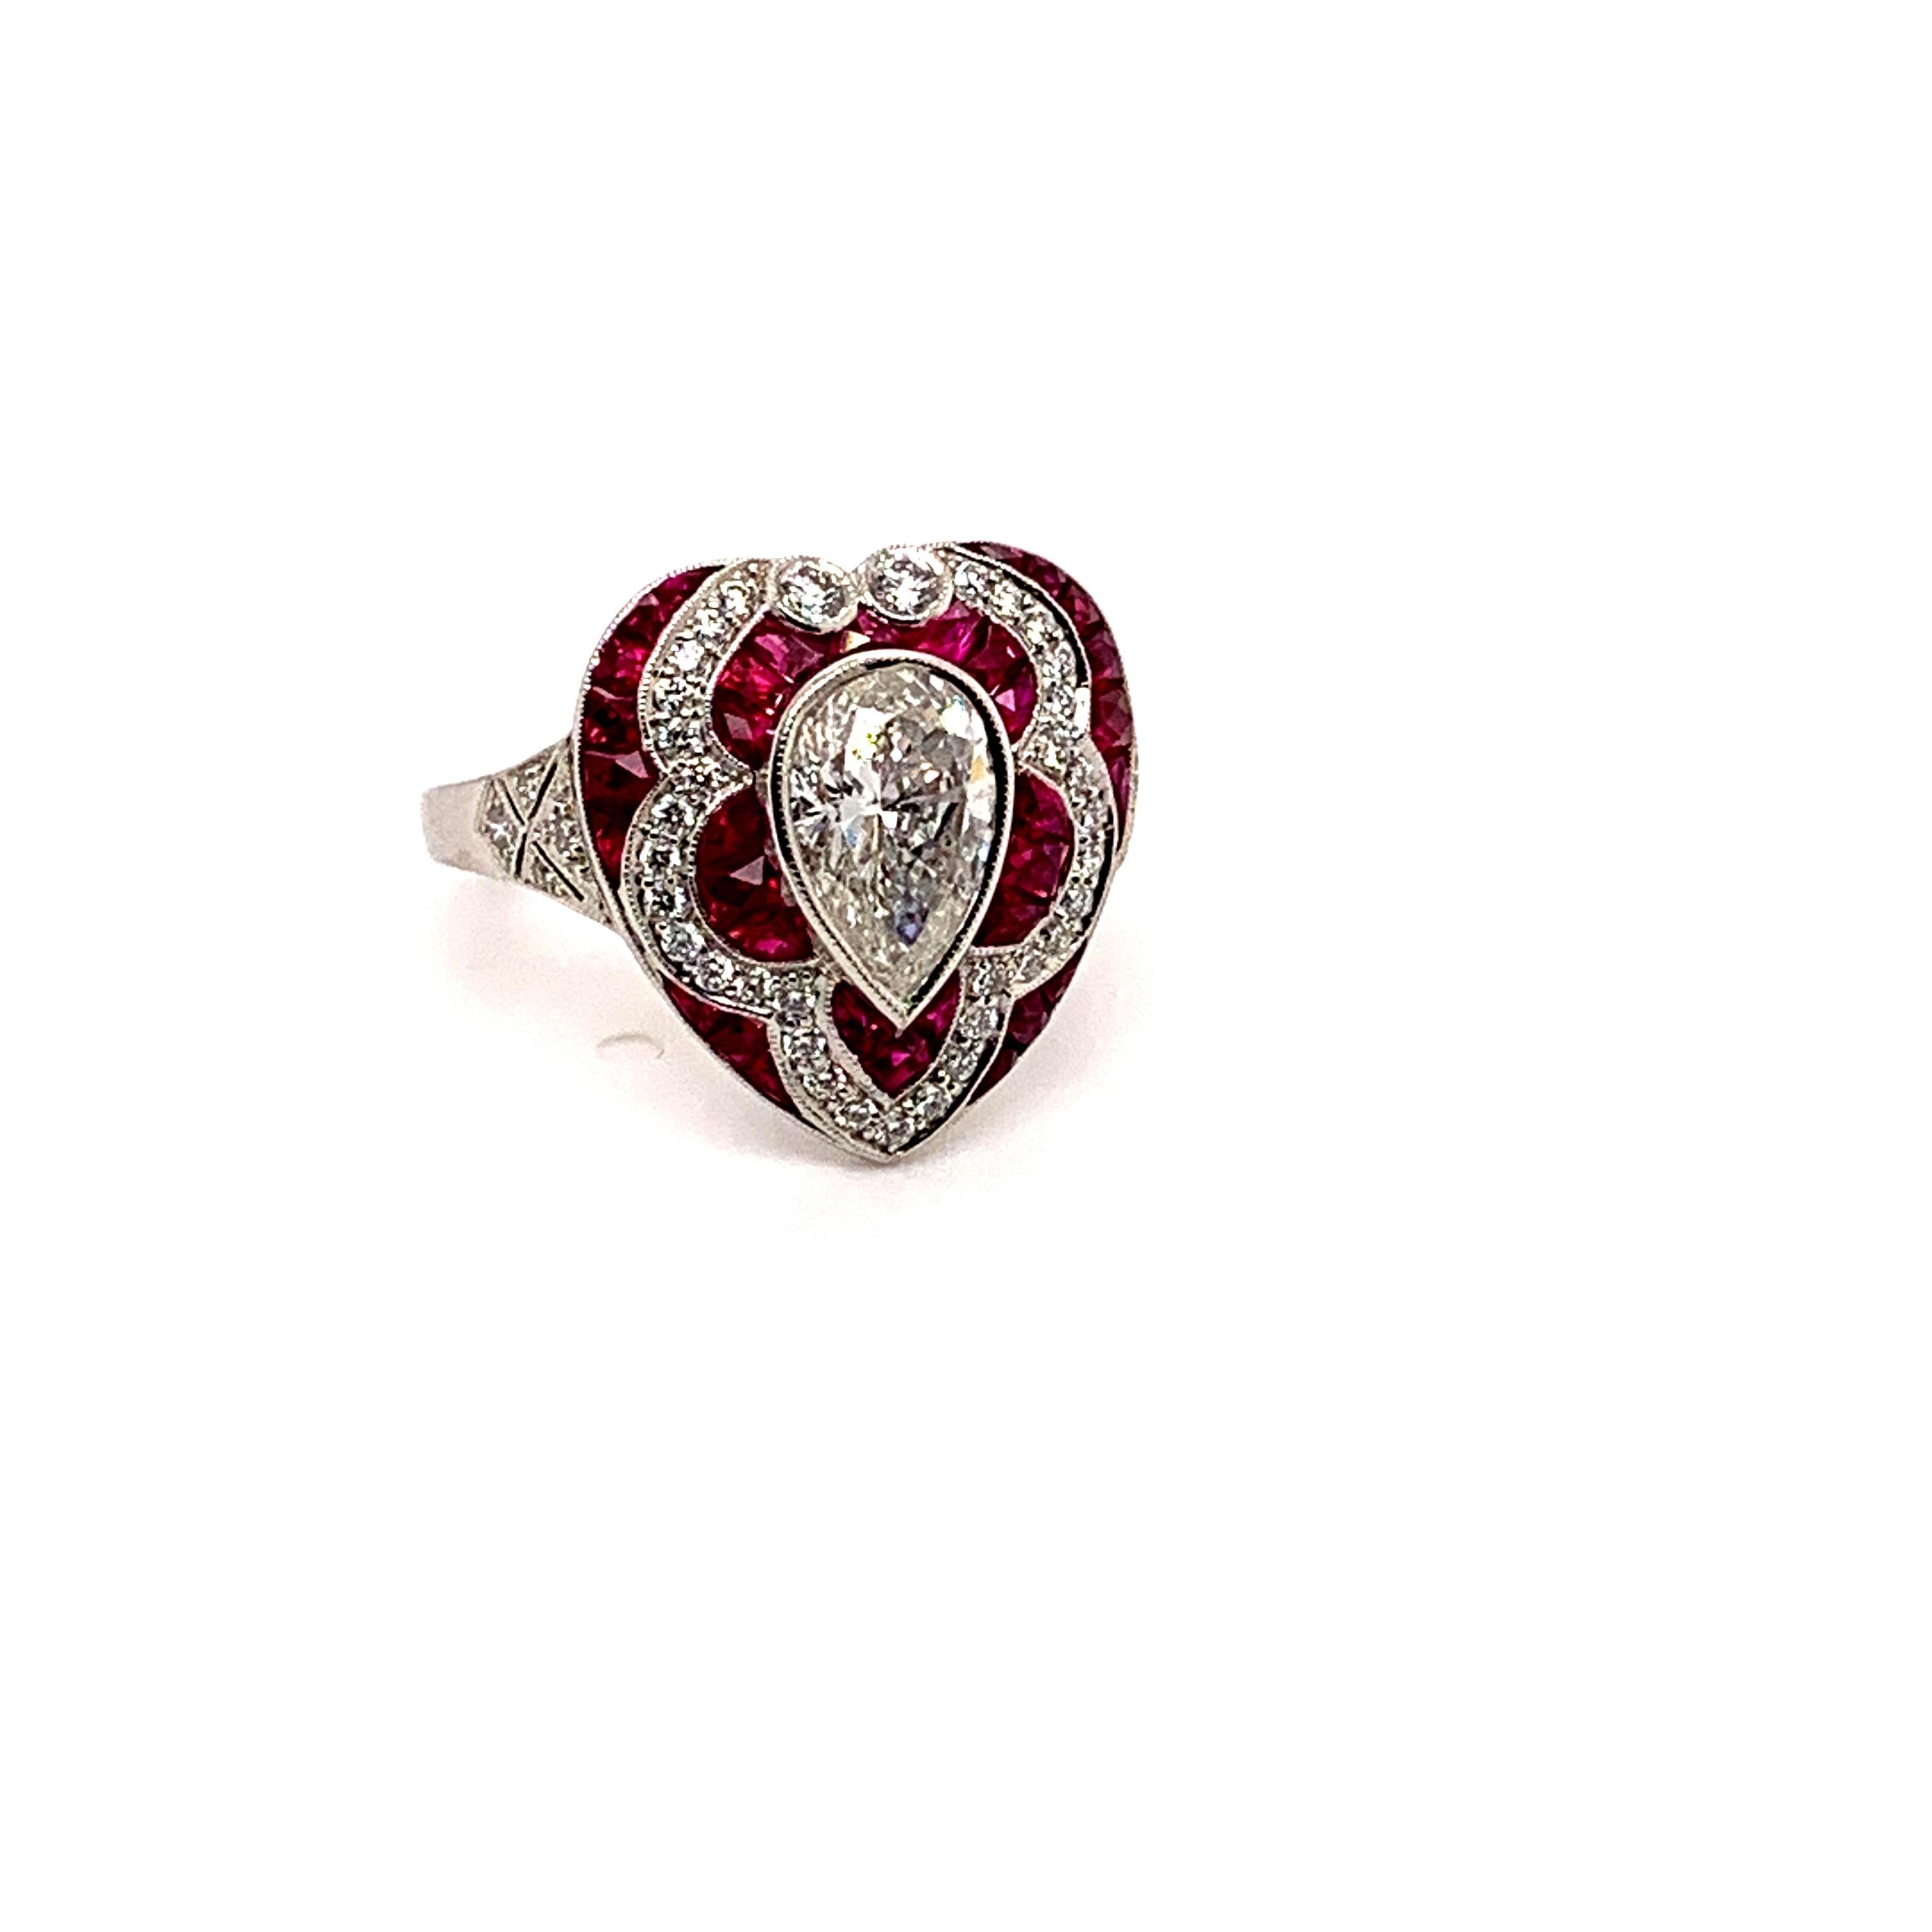 Sophia D, 1.30 Carat Pear Shape Center Diamond and Ruby Ring set in Platinum For Sale 1